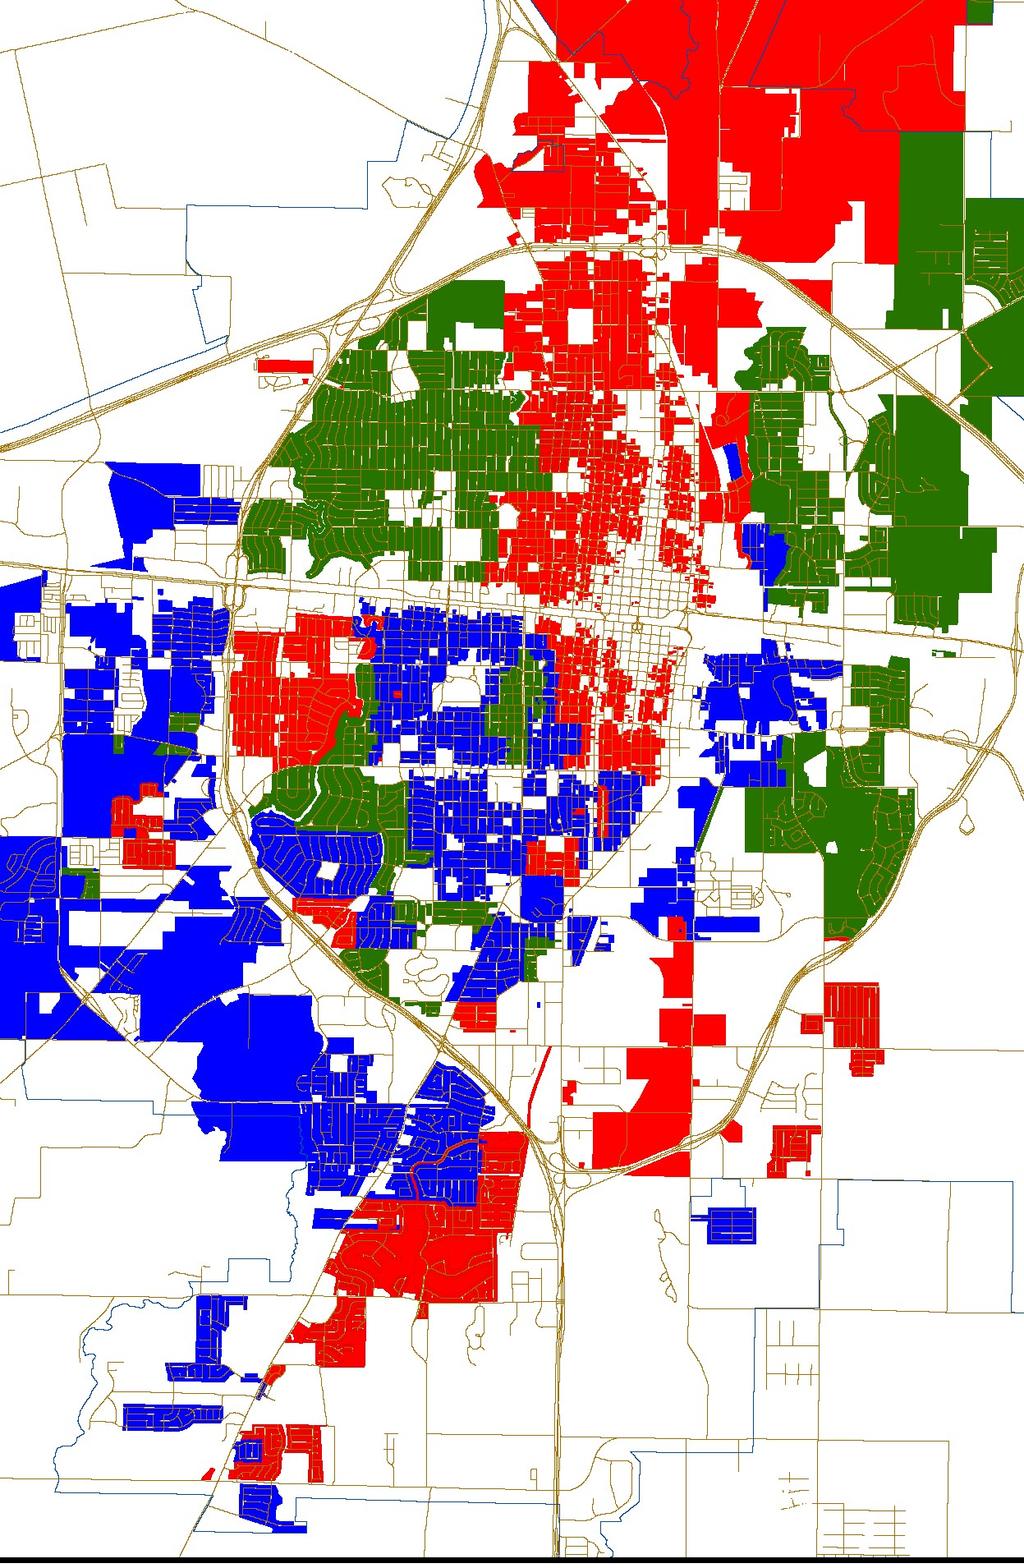 Map of Total Property Inspection for City of Abilene 31 Last day for property owner to give